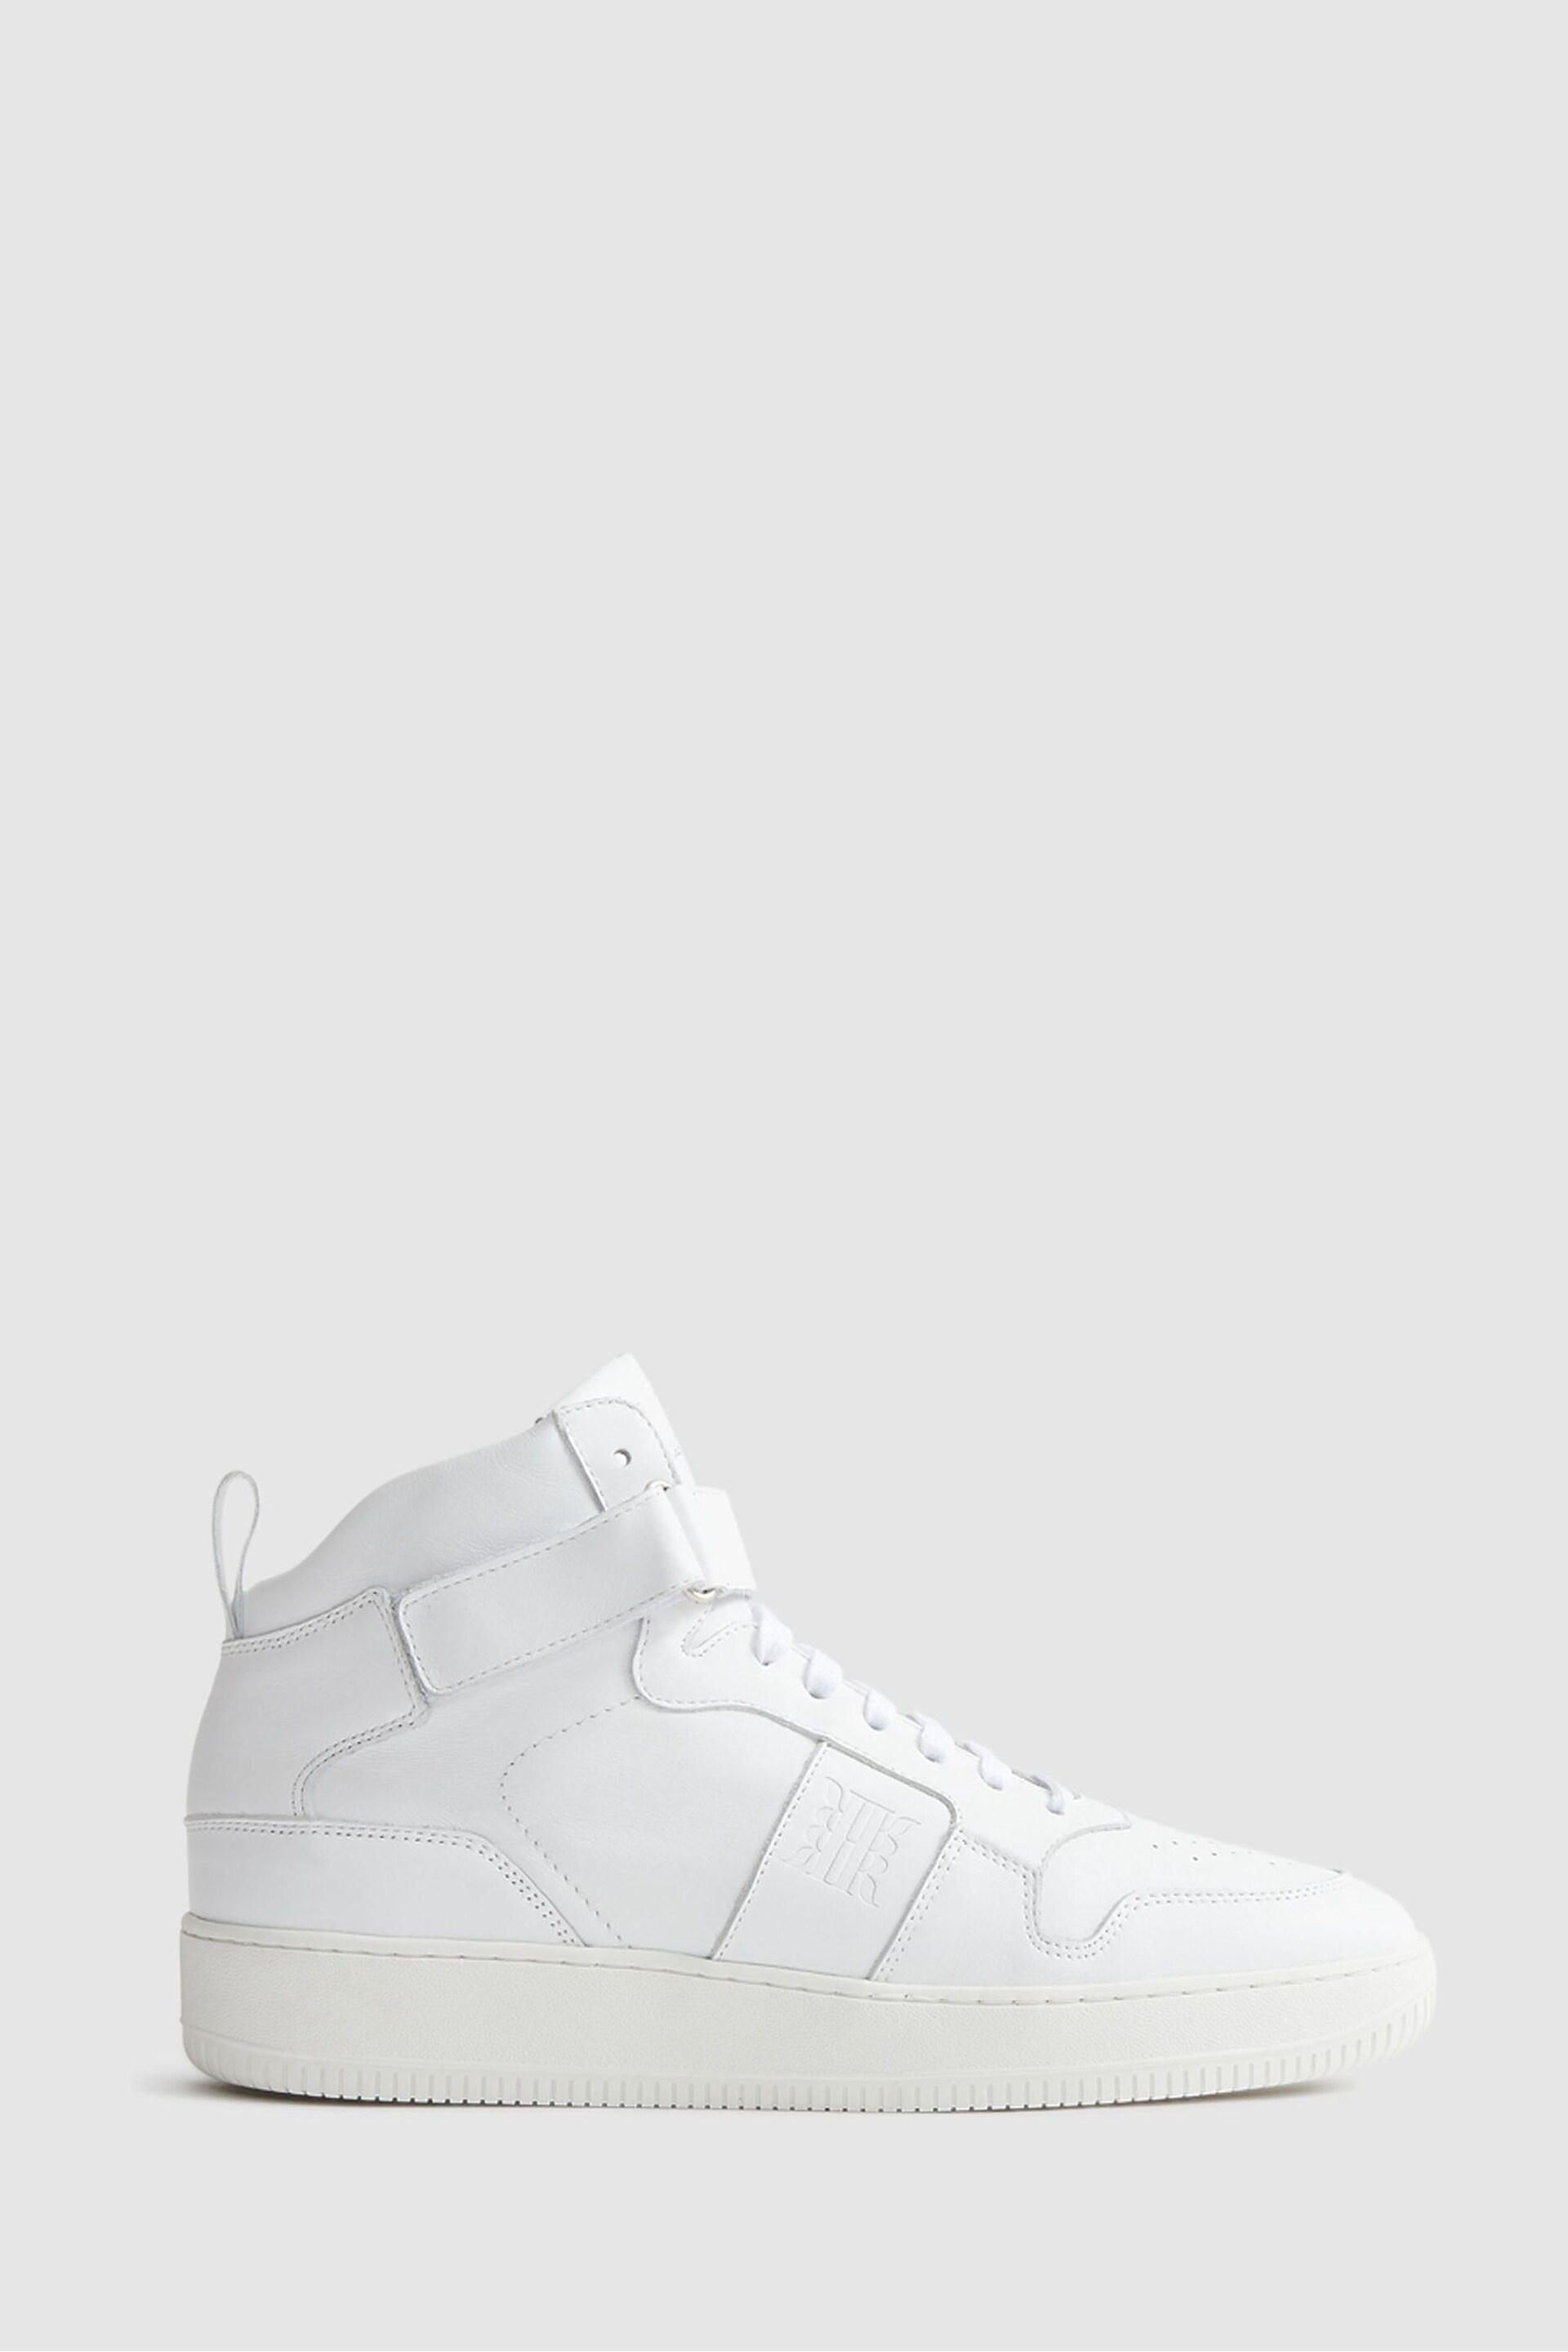 Reiss White Aira High Top Leather Trainers - Image 1 of 7